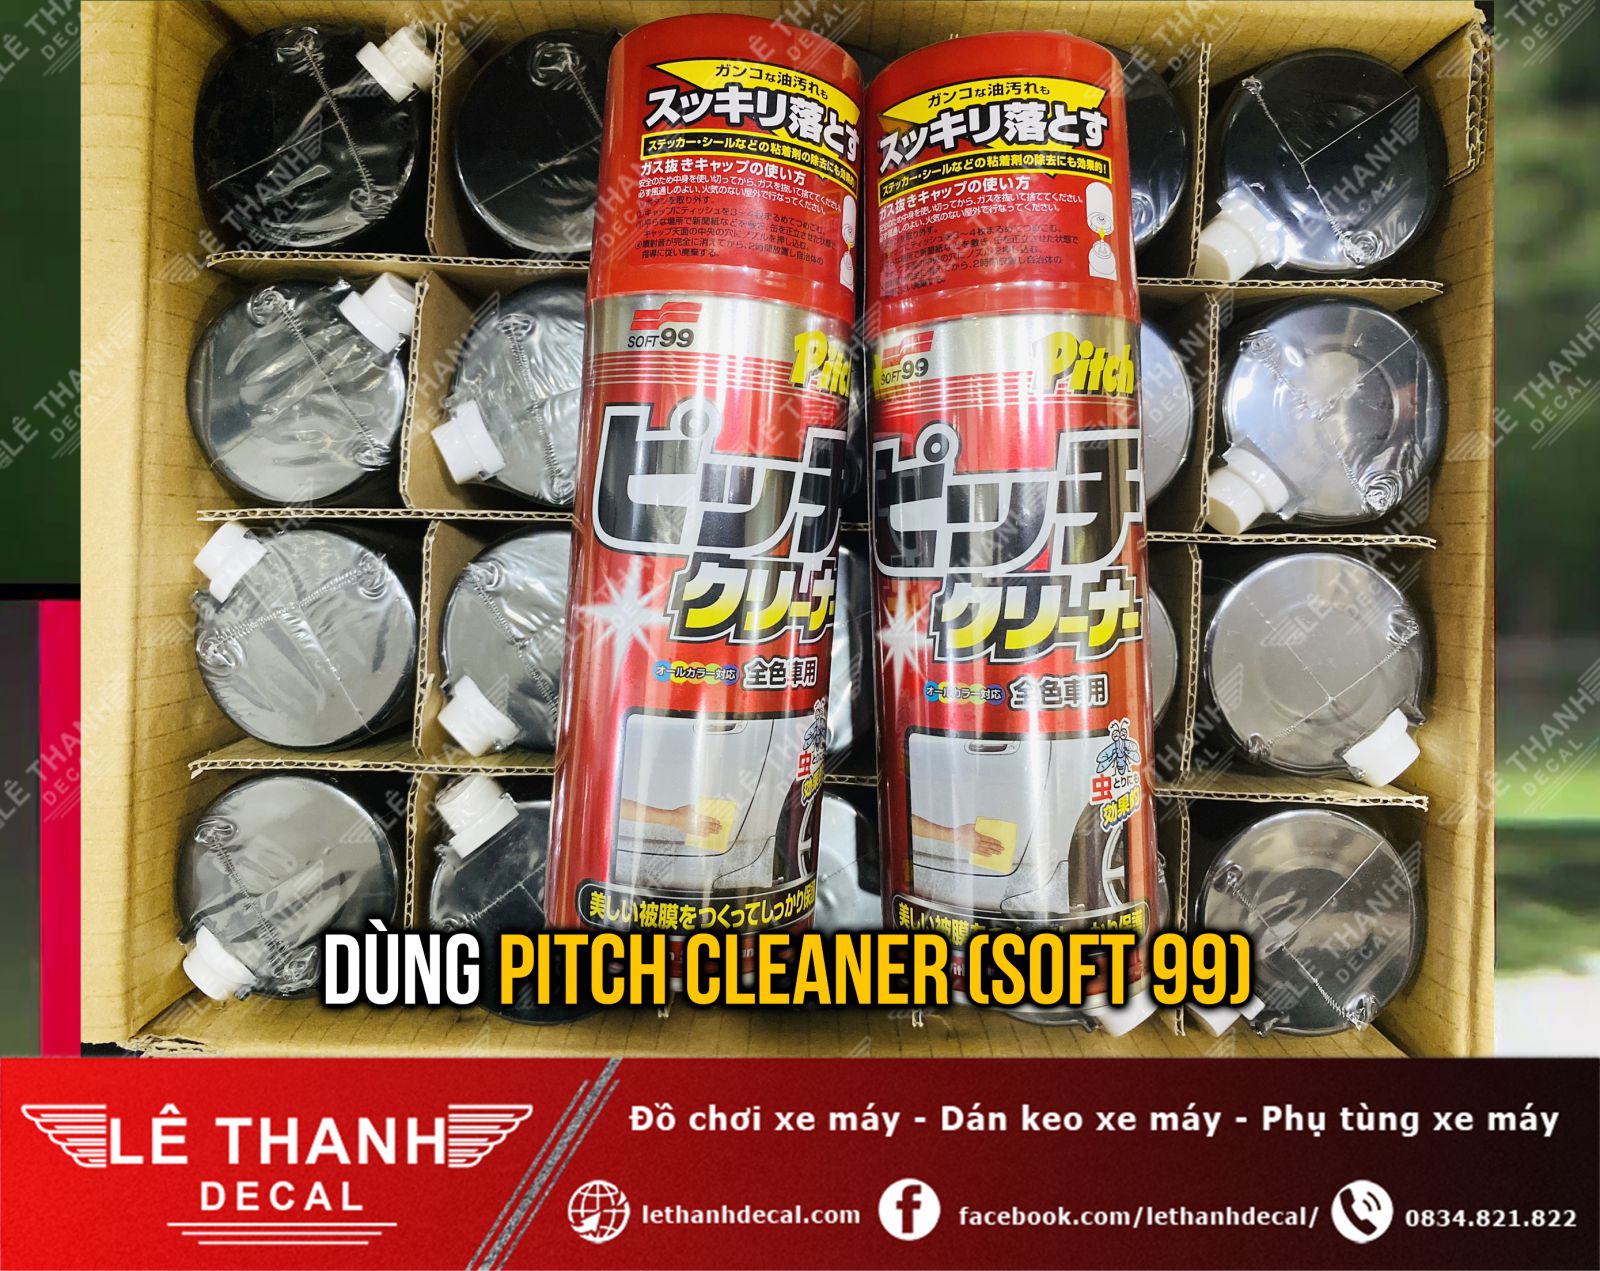 Pitch cleaner (Soft 99) lột decal xe máy